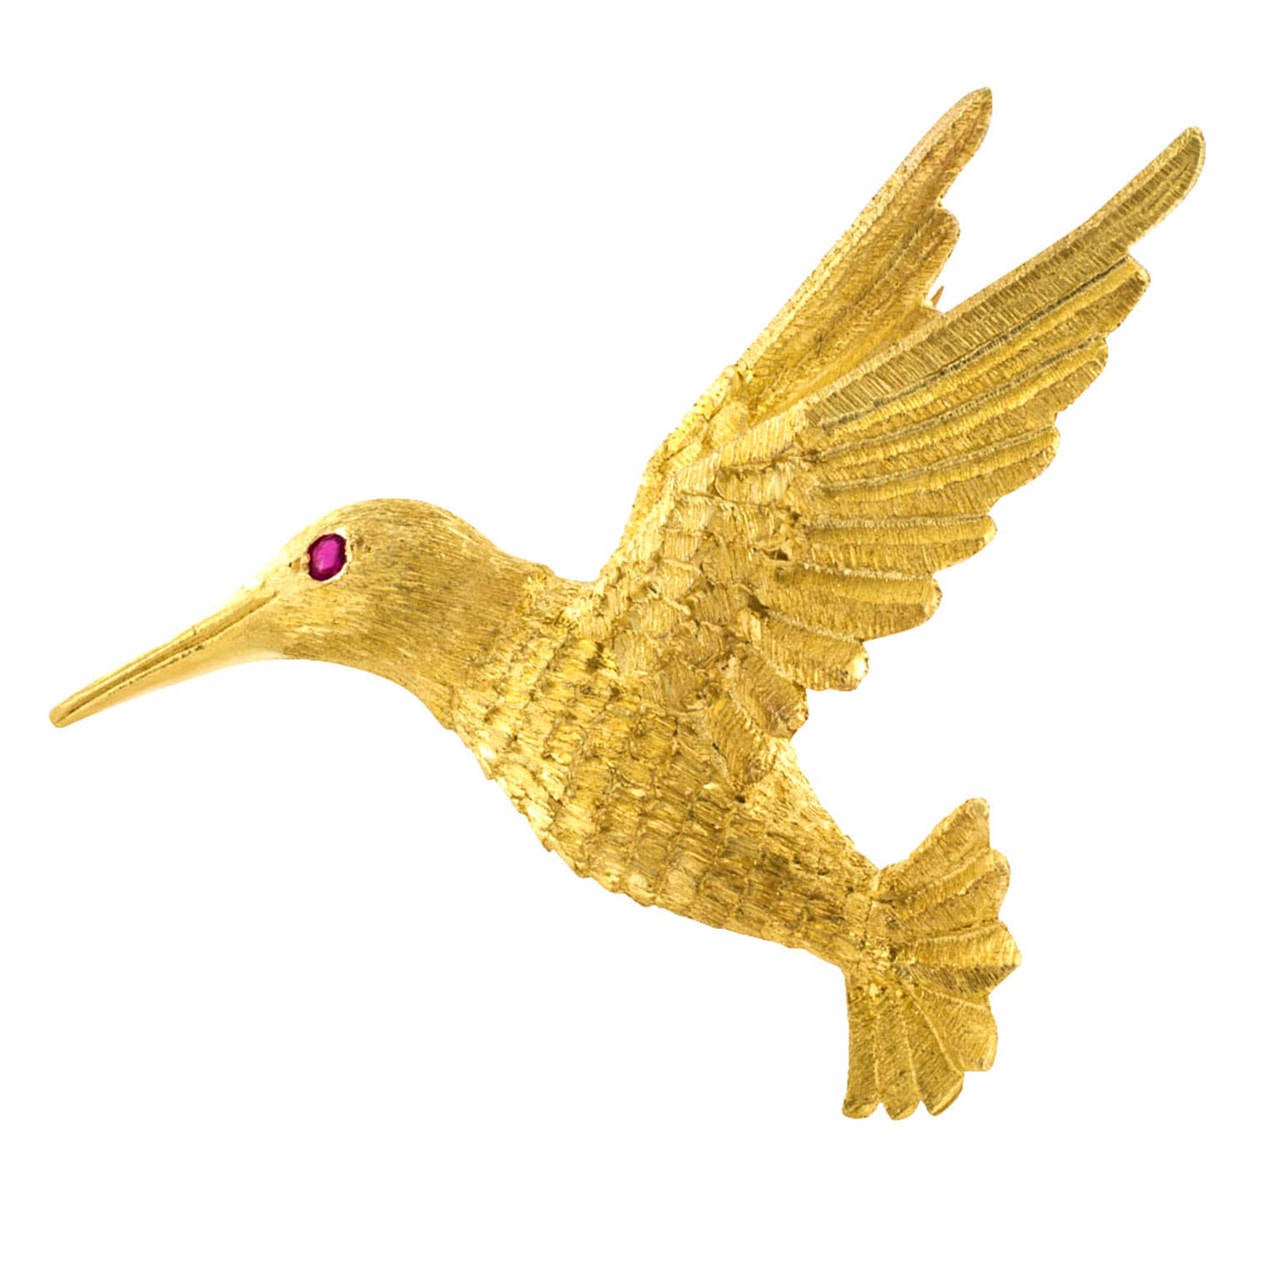 Scully and Scully Estate Hummingbird Brooch

Easy to love, very easy on the eyes.  This delightful 18 karat yellow gold hummingbird brooch speaks volumes about that self assured manner and graceful elegance so notorious about humming birds.  To be